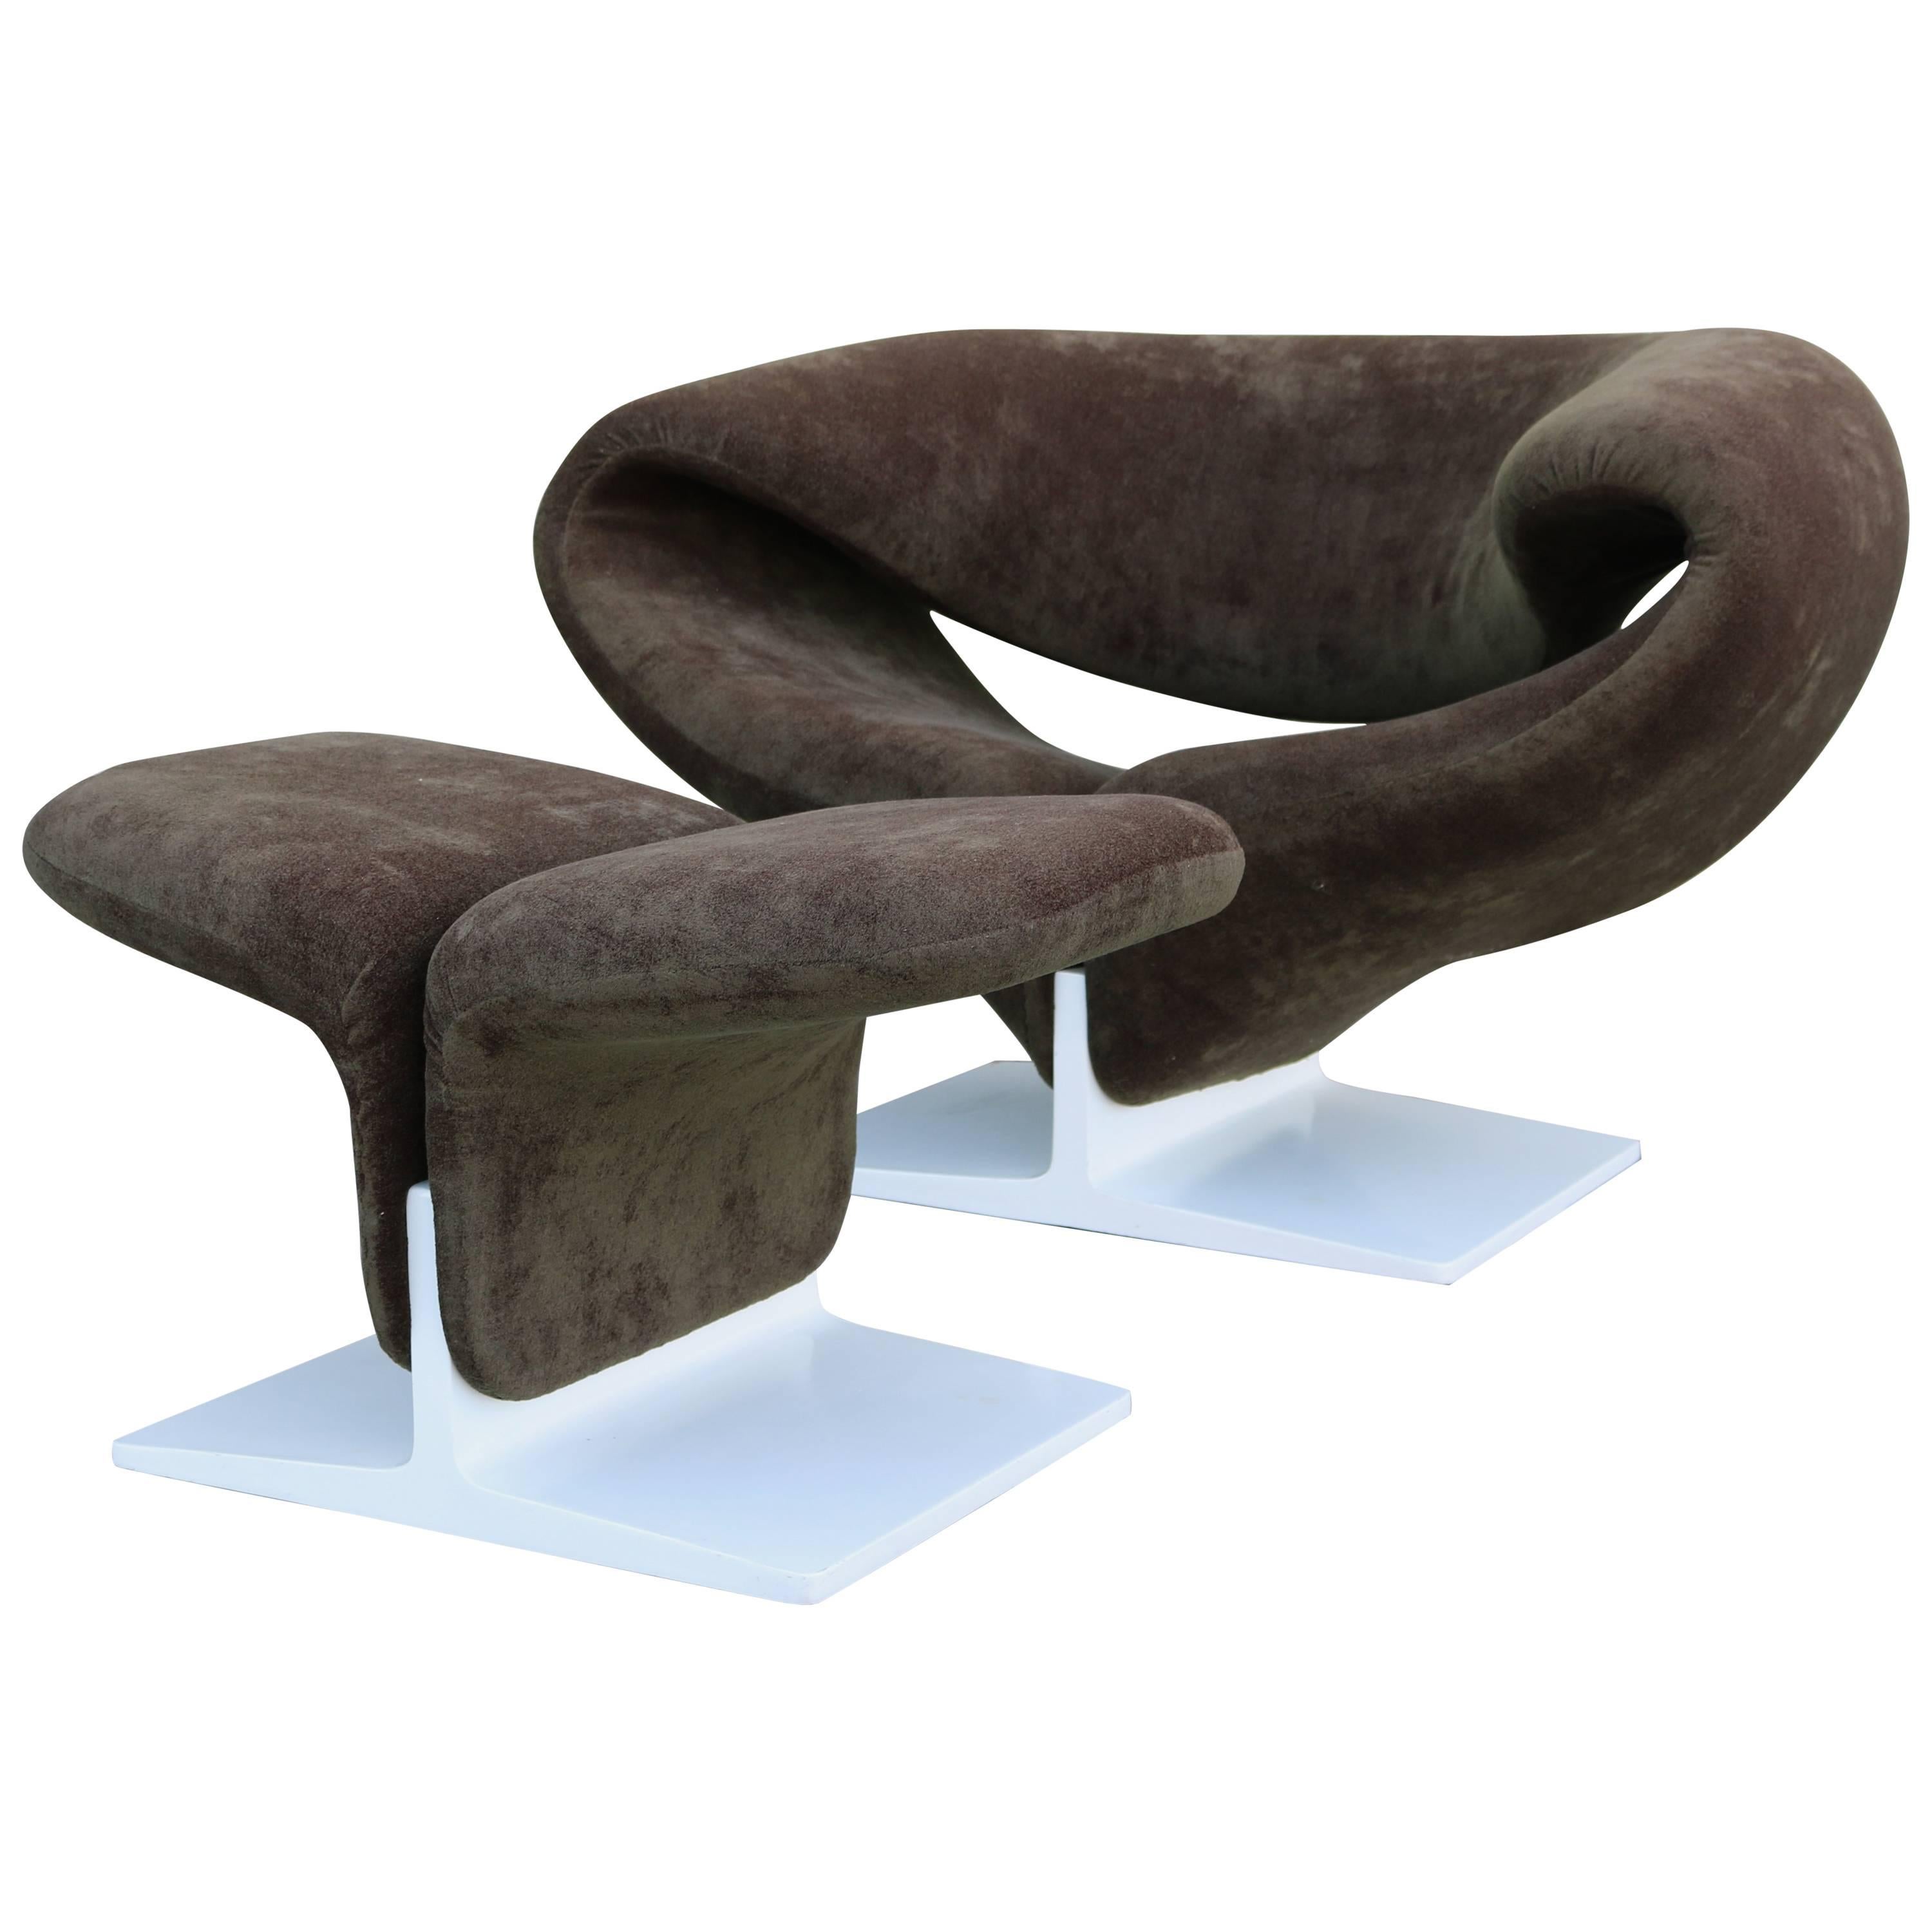 1960s Ribbon Chair with Ottoman by Pierre Paulin for Artifort